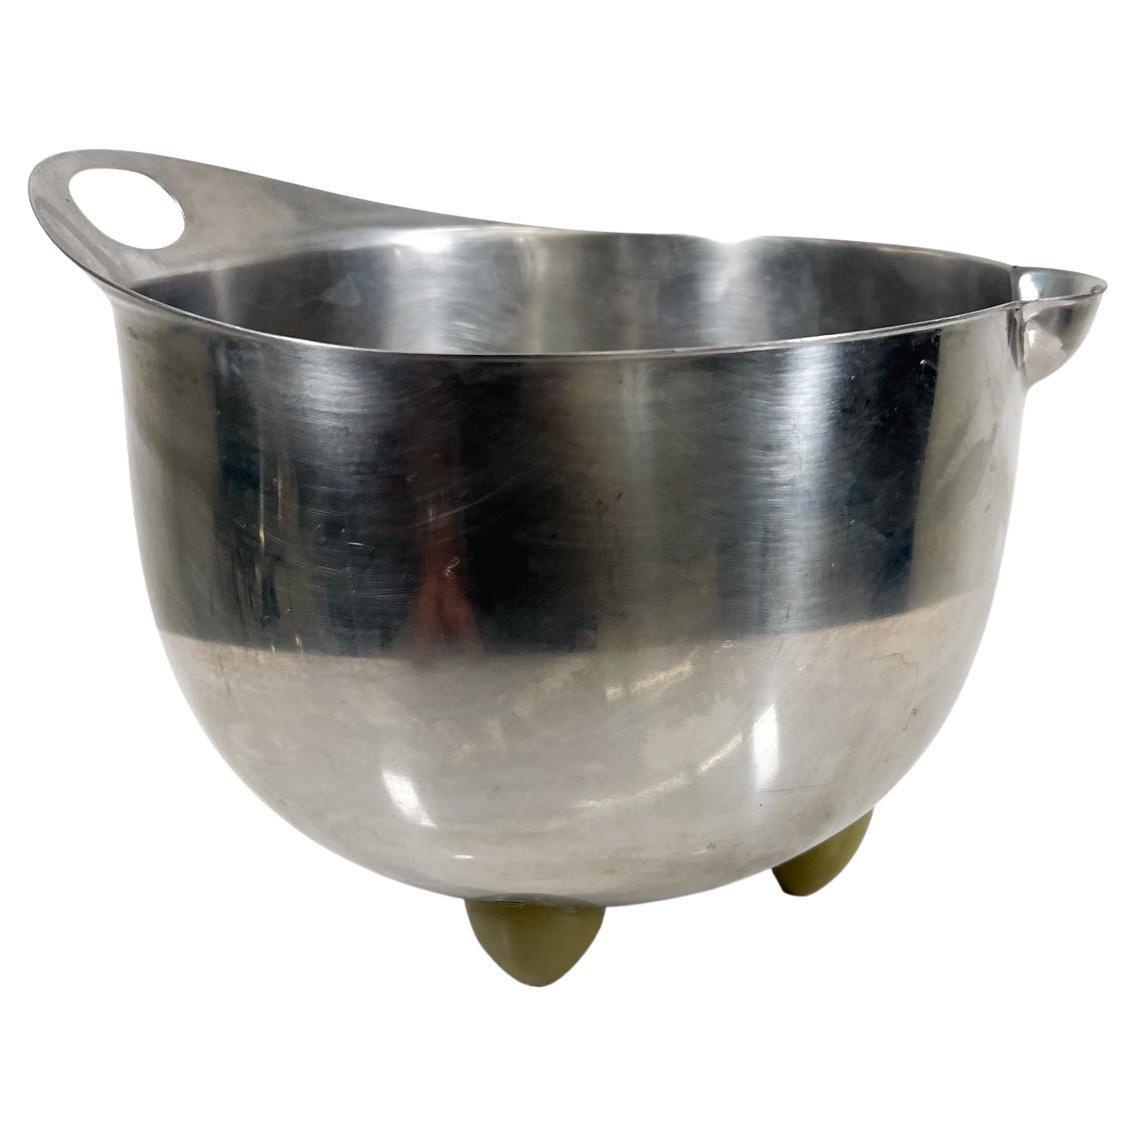 1985 Michael Graves Design Stainless Steel Footed Mixing Bowl